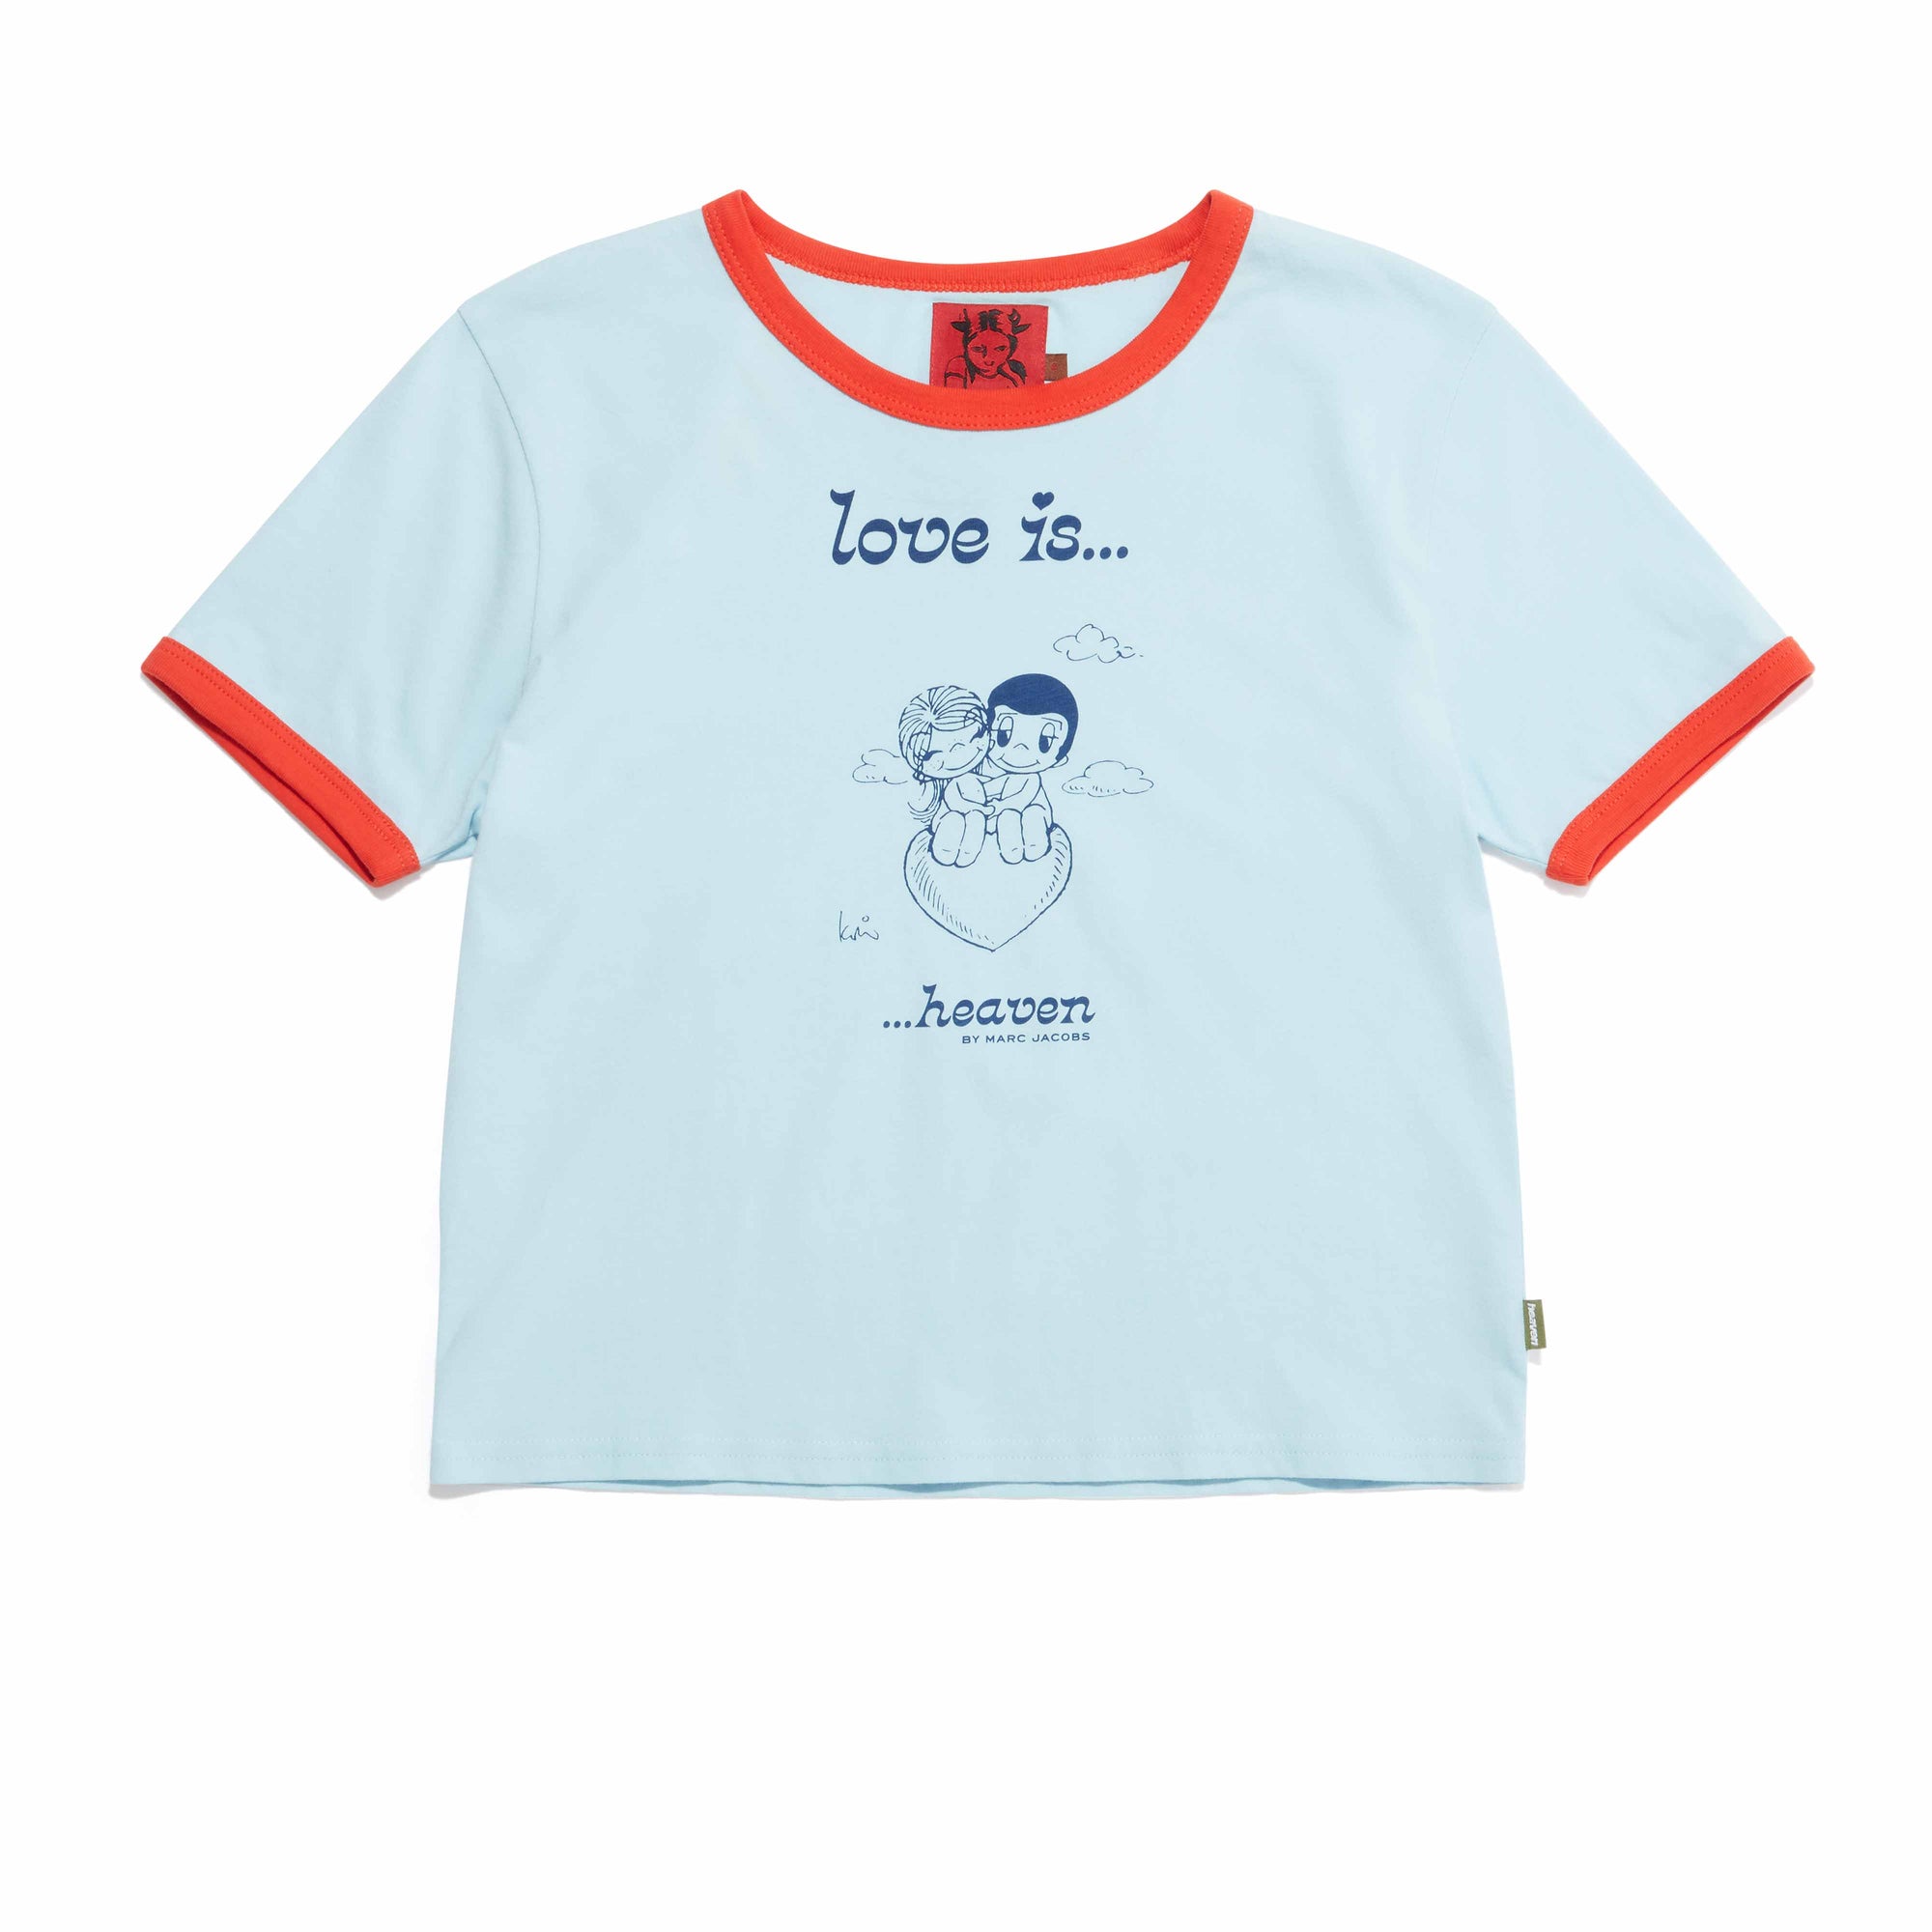 Heaven by Marc Jacobs - Women’s Love Is Baby Tee - (Light Blue) view 1